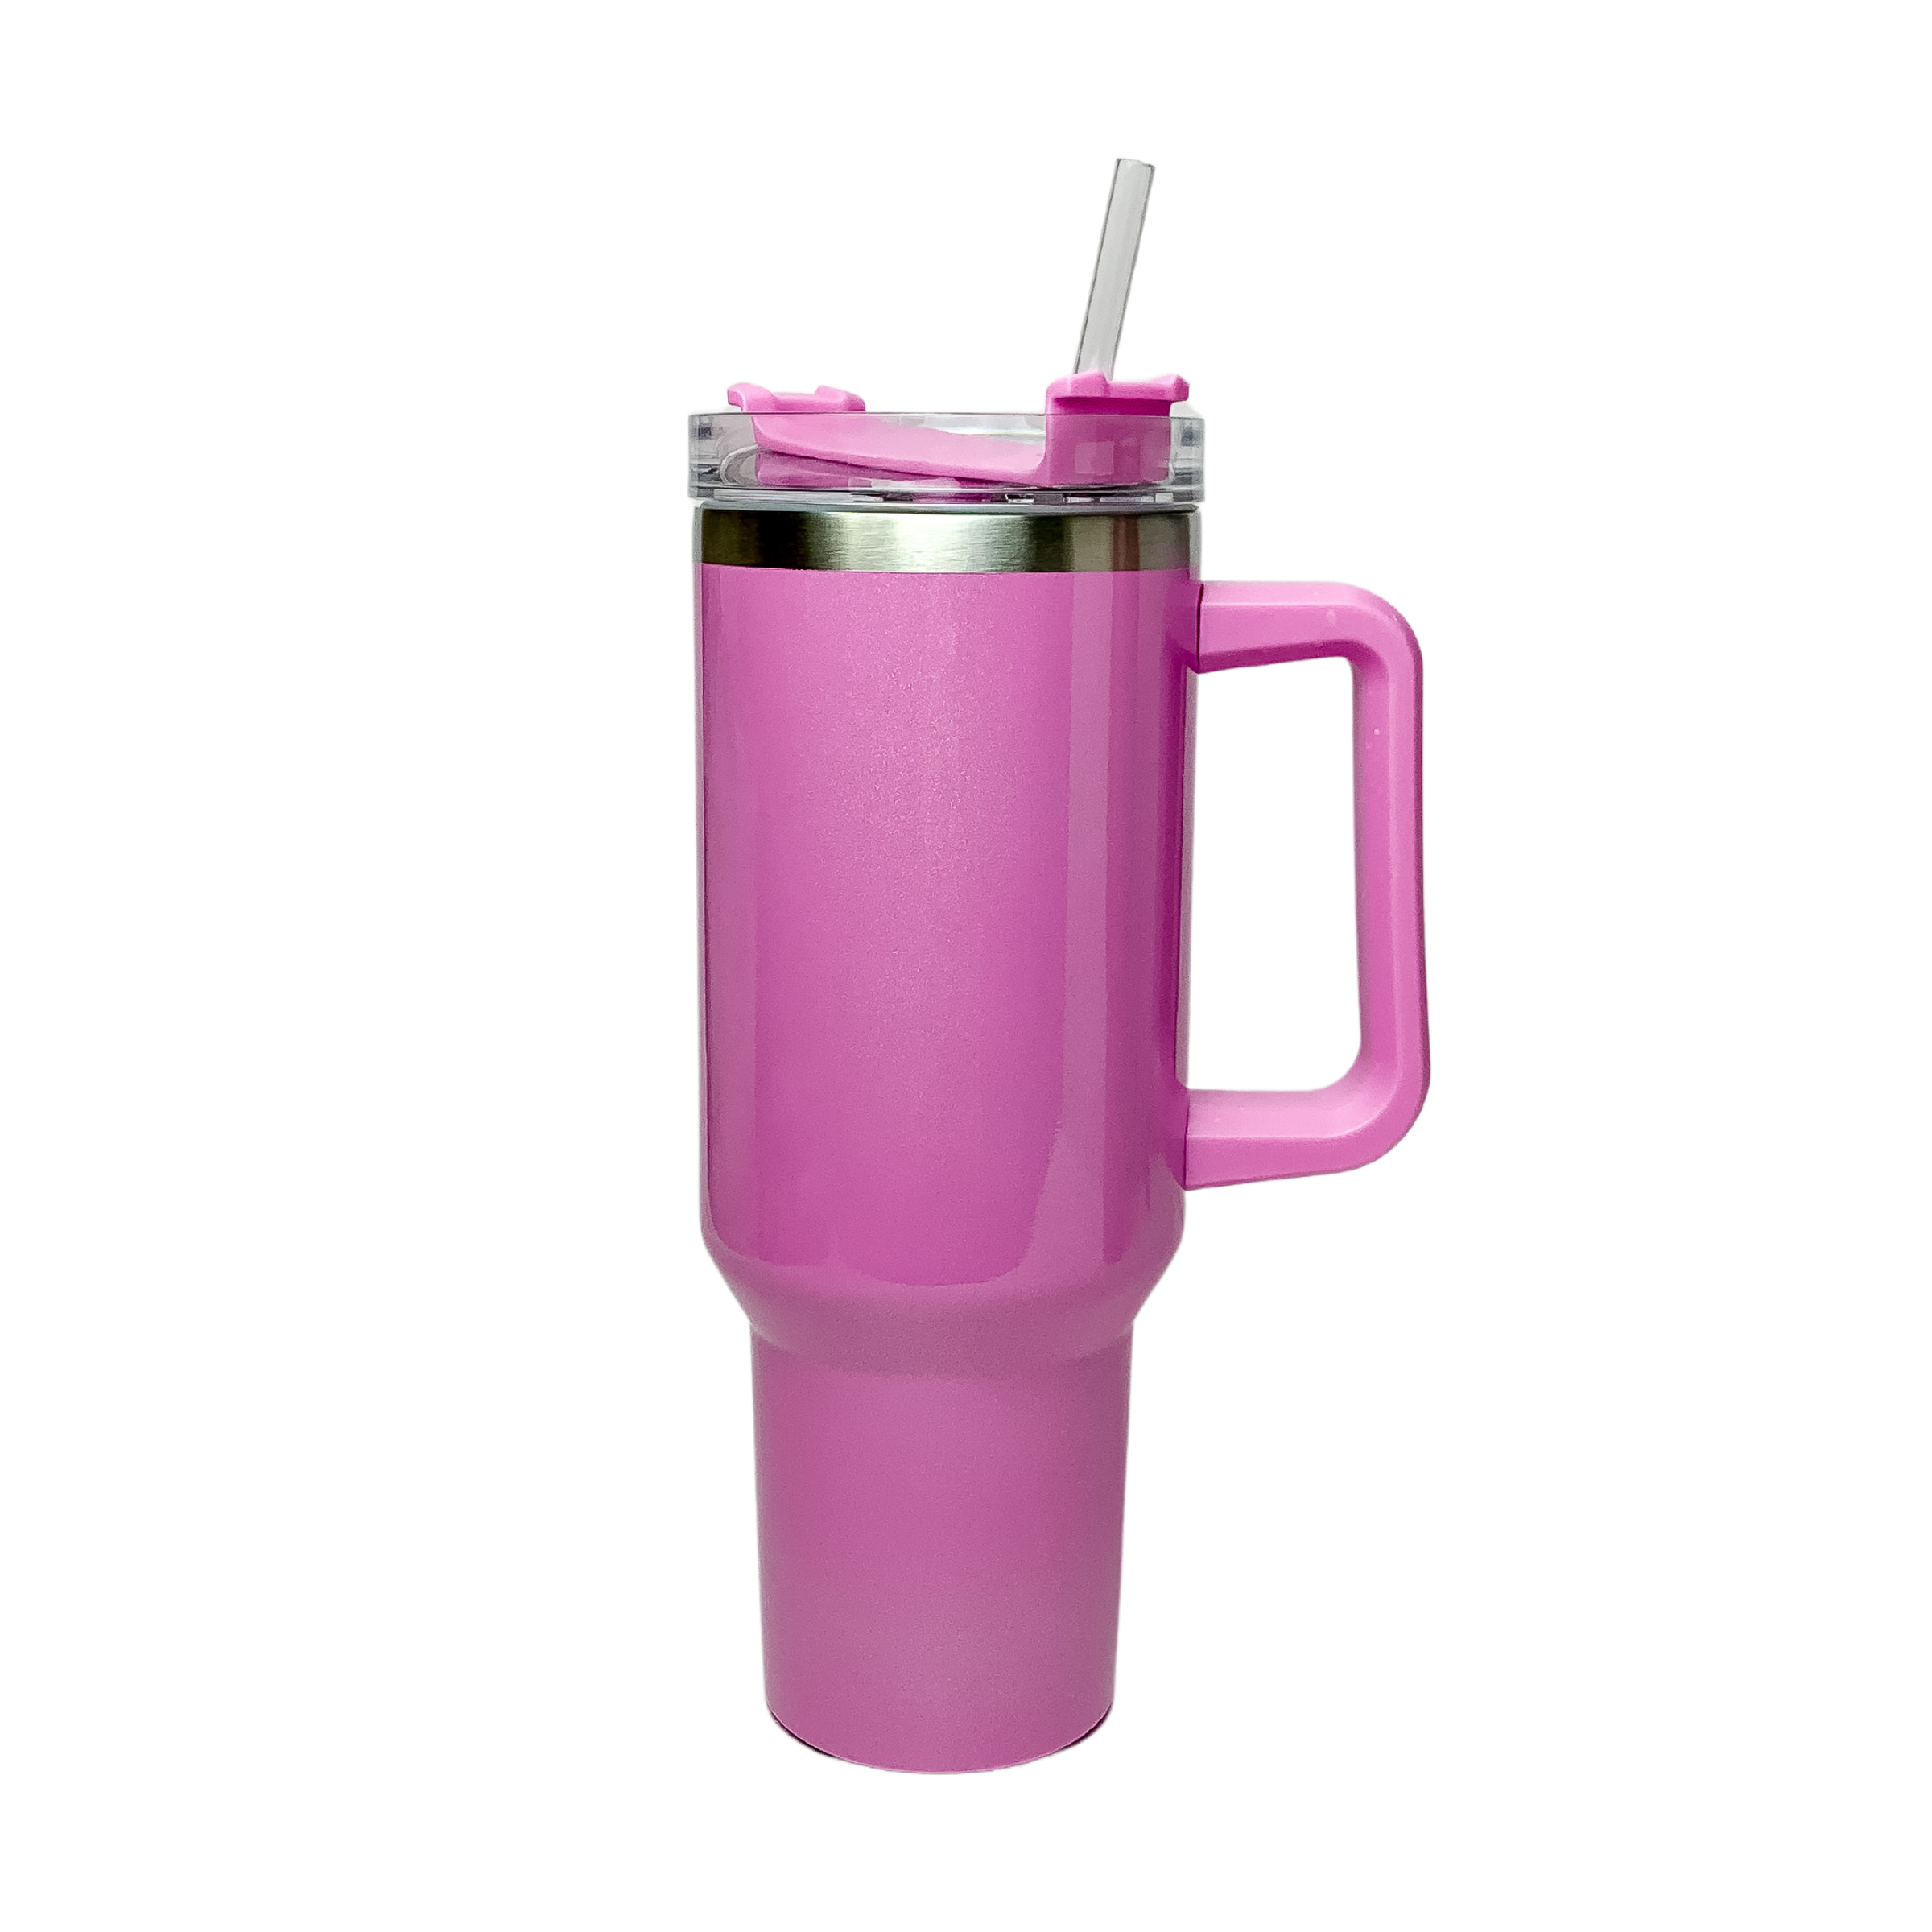 Pictured is a purple shimmer tumbler with a handle and clear straw. This tumbler is pictured on a white background.